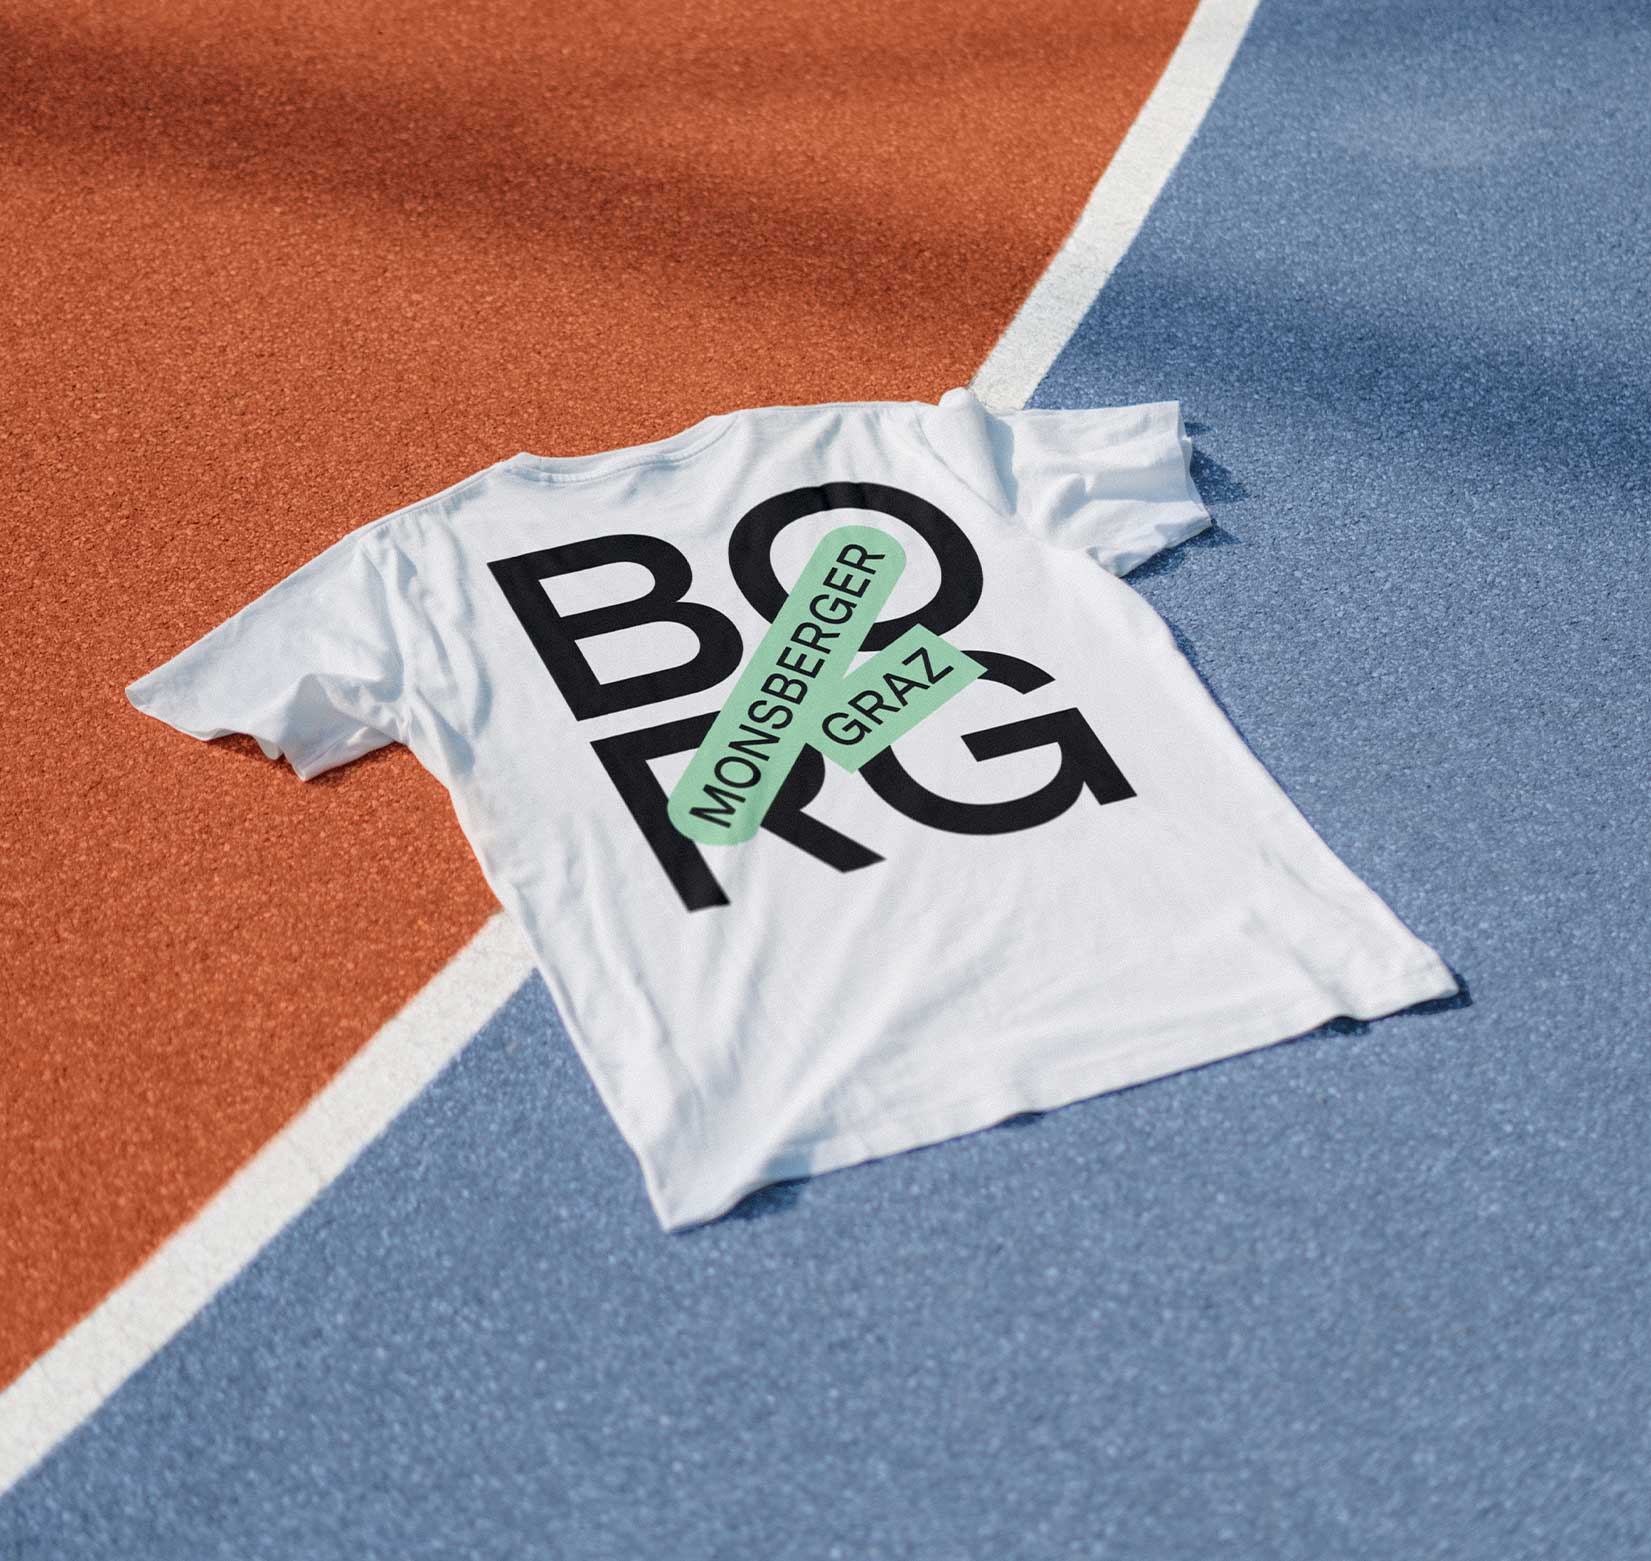 A white t-shirt with the BORG Monsberger logo on the back, lying flat on the ground at a blue and orange basketball court.